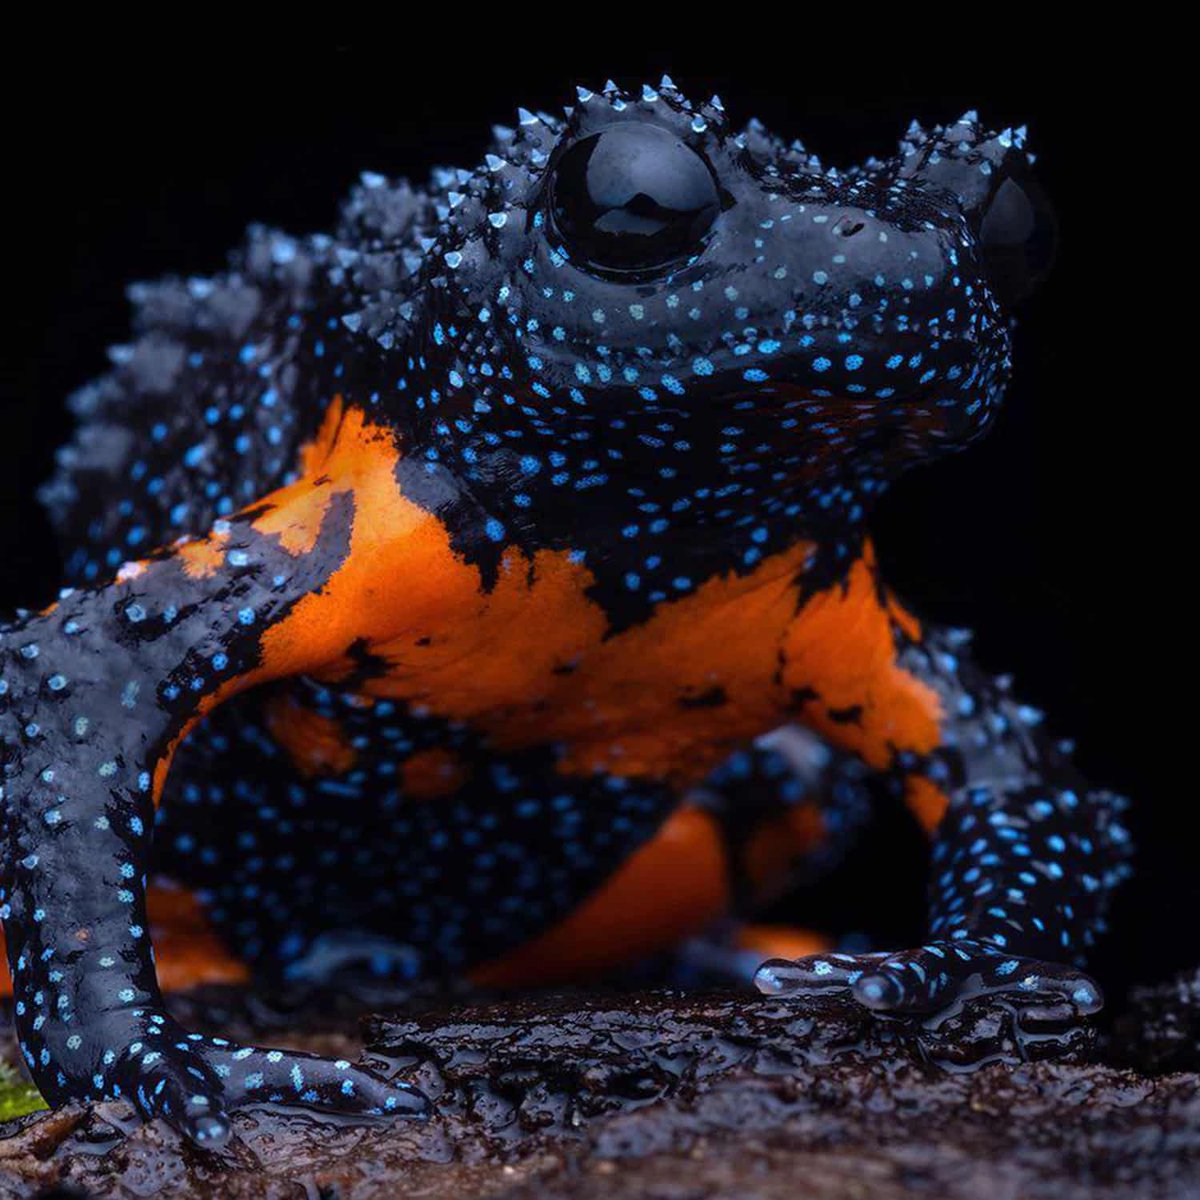 Galaxy Frog Latin name: Nyctibatrachus petraeus
- Gestation: N/A, lay eggs
- Lay clutches of eggs, usually containing dozens of embryos
- Average lifespan of 5-10 years
- Inhabit fast-flowing streams and moist forest floors
- Native to the Western Ghats of India
#NS_Facts